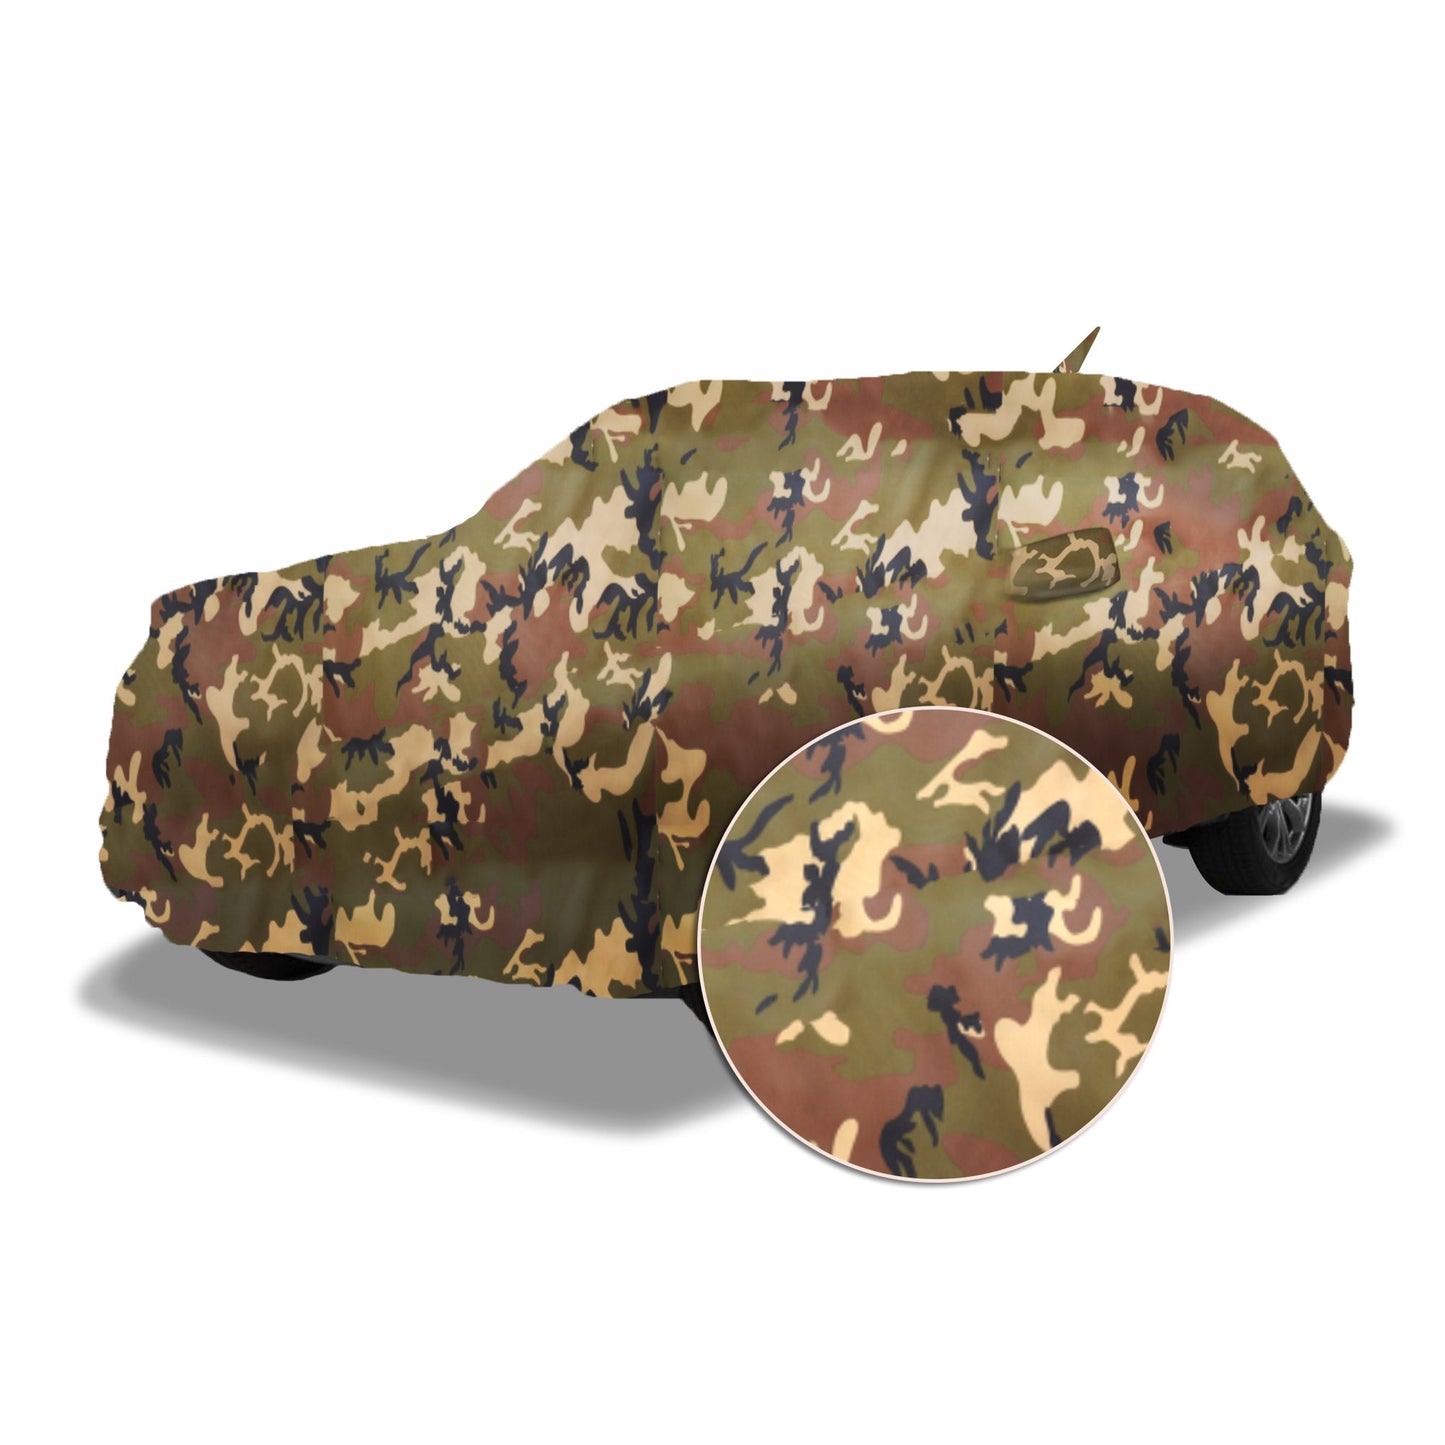 Ascot Toyota Innova Car Body Cover 2005-2016 Model Extra Strong & Dust Proof Jungle Military Car Cover with UV Proof & Water-Resistant Coating